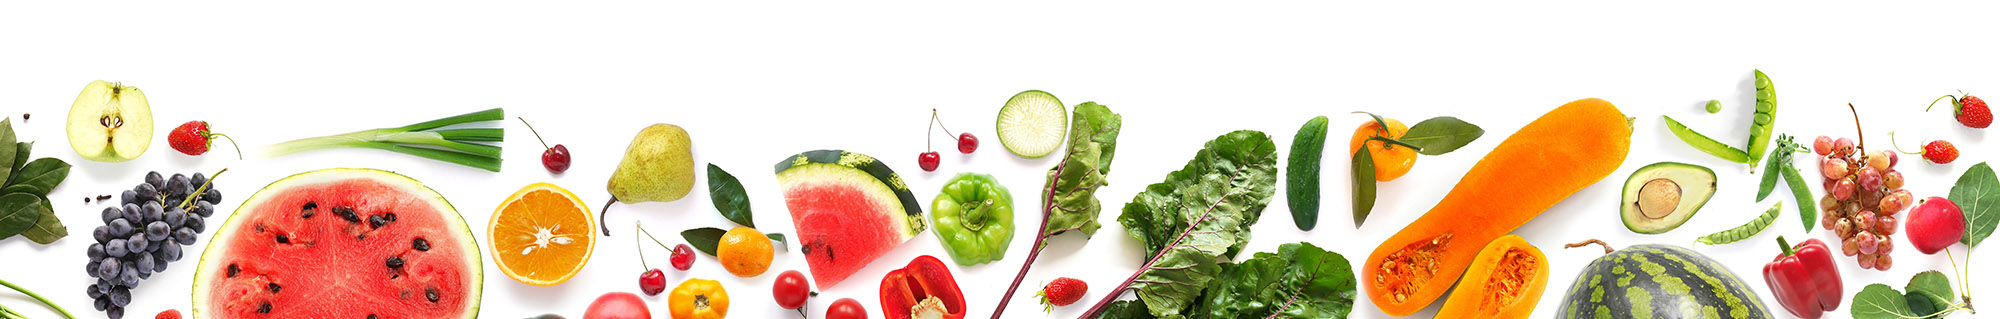 Banner from various vegetables and fruits isolated on white back